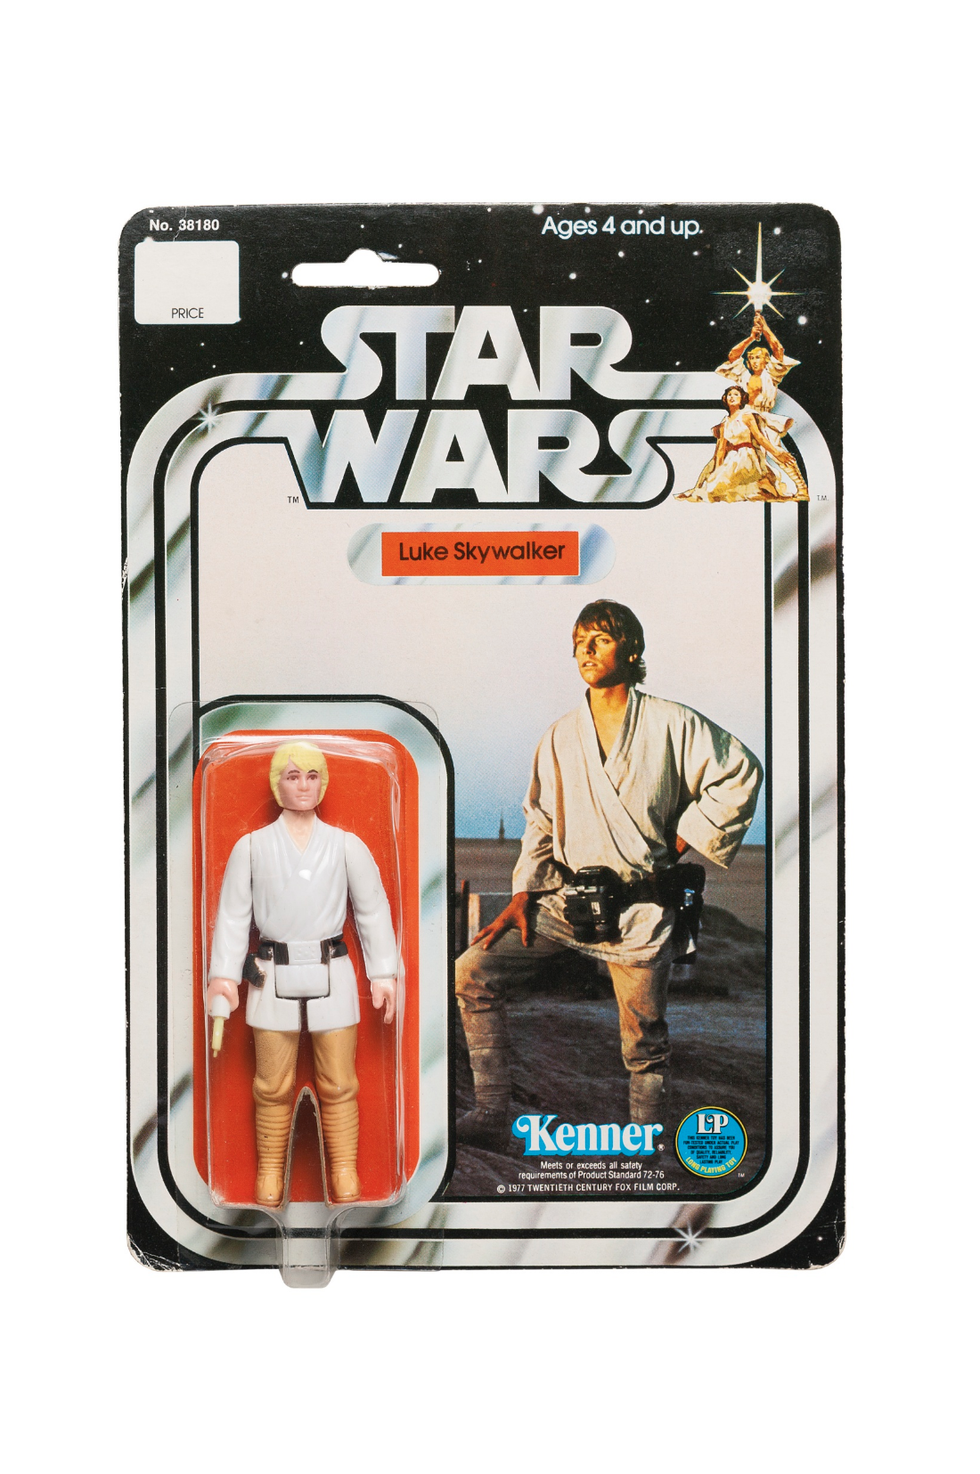 60 Most Valuable Star Wars Toys